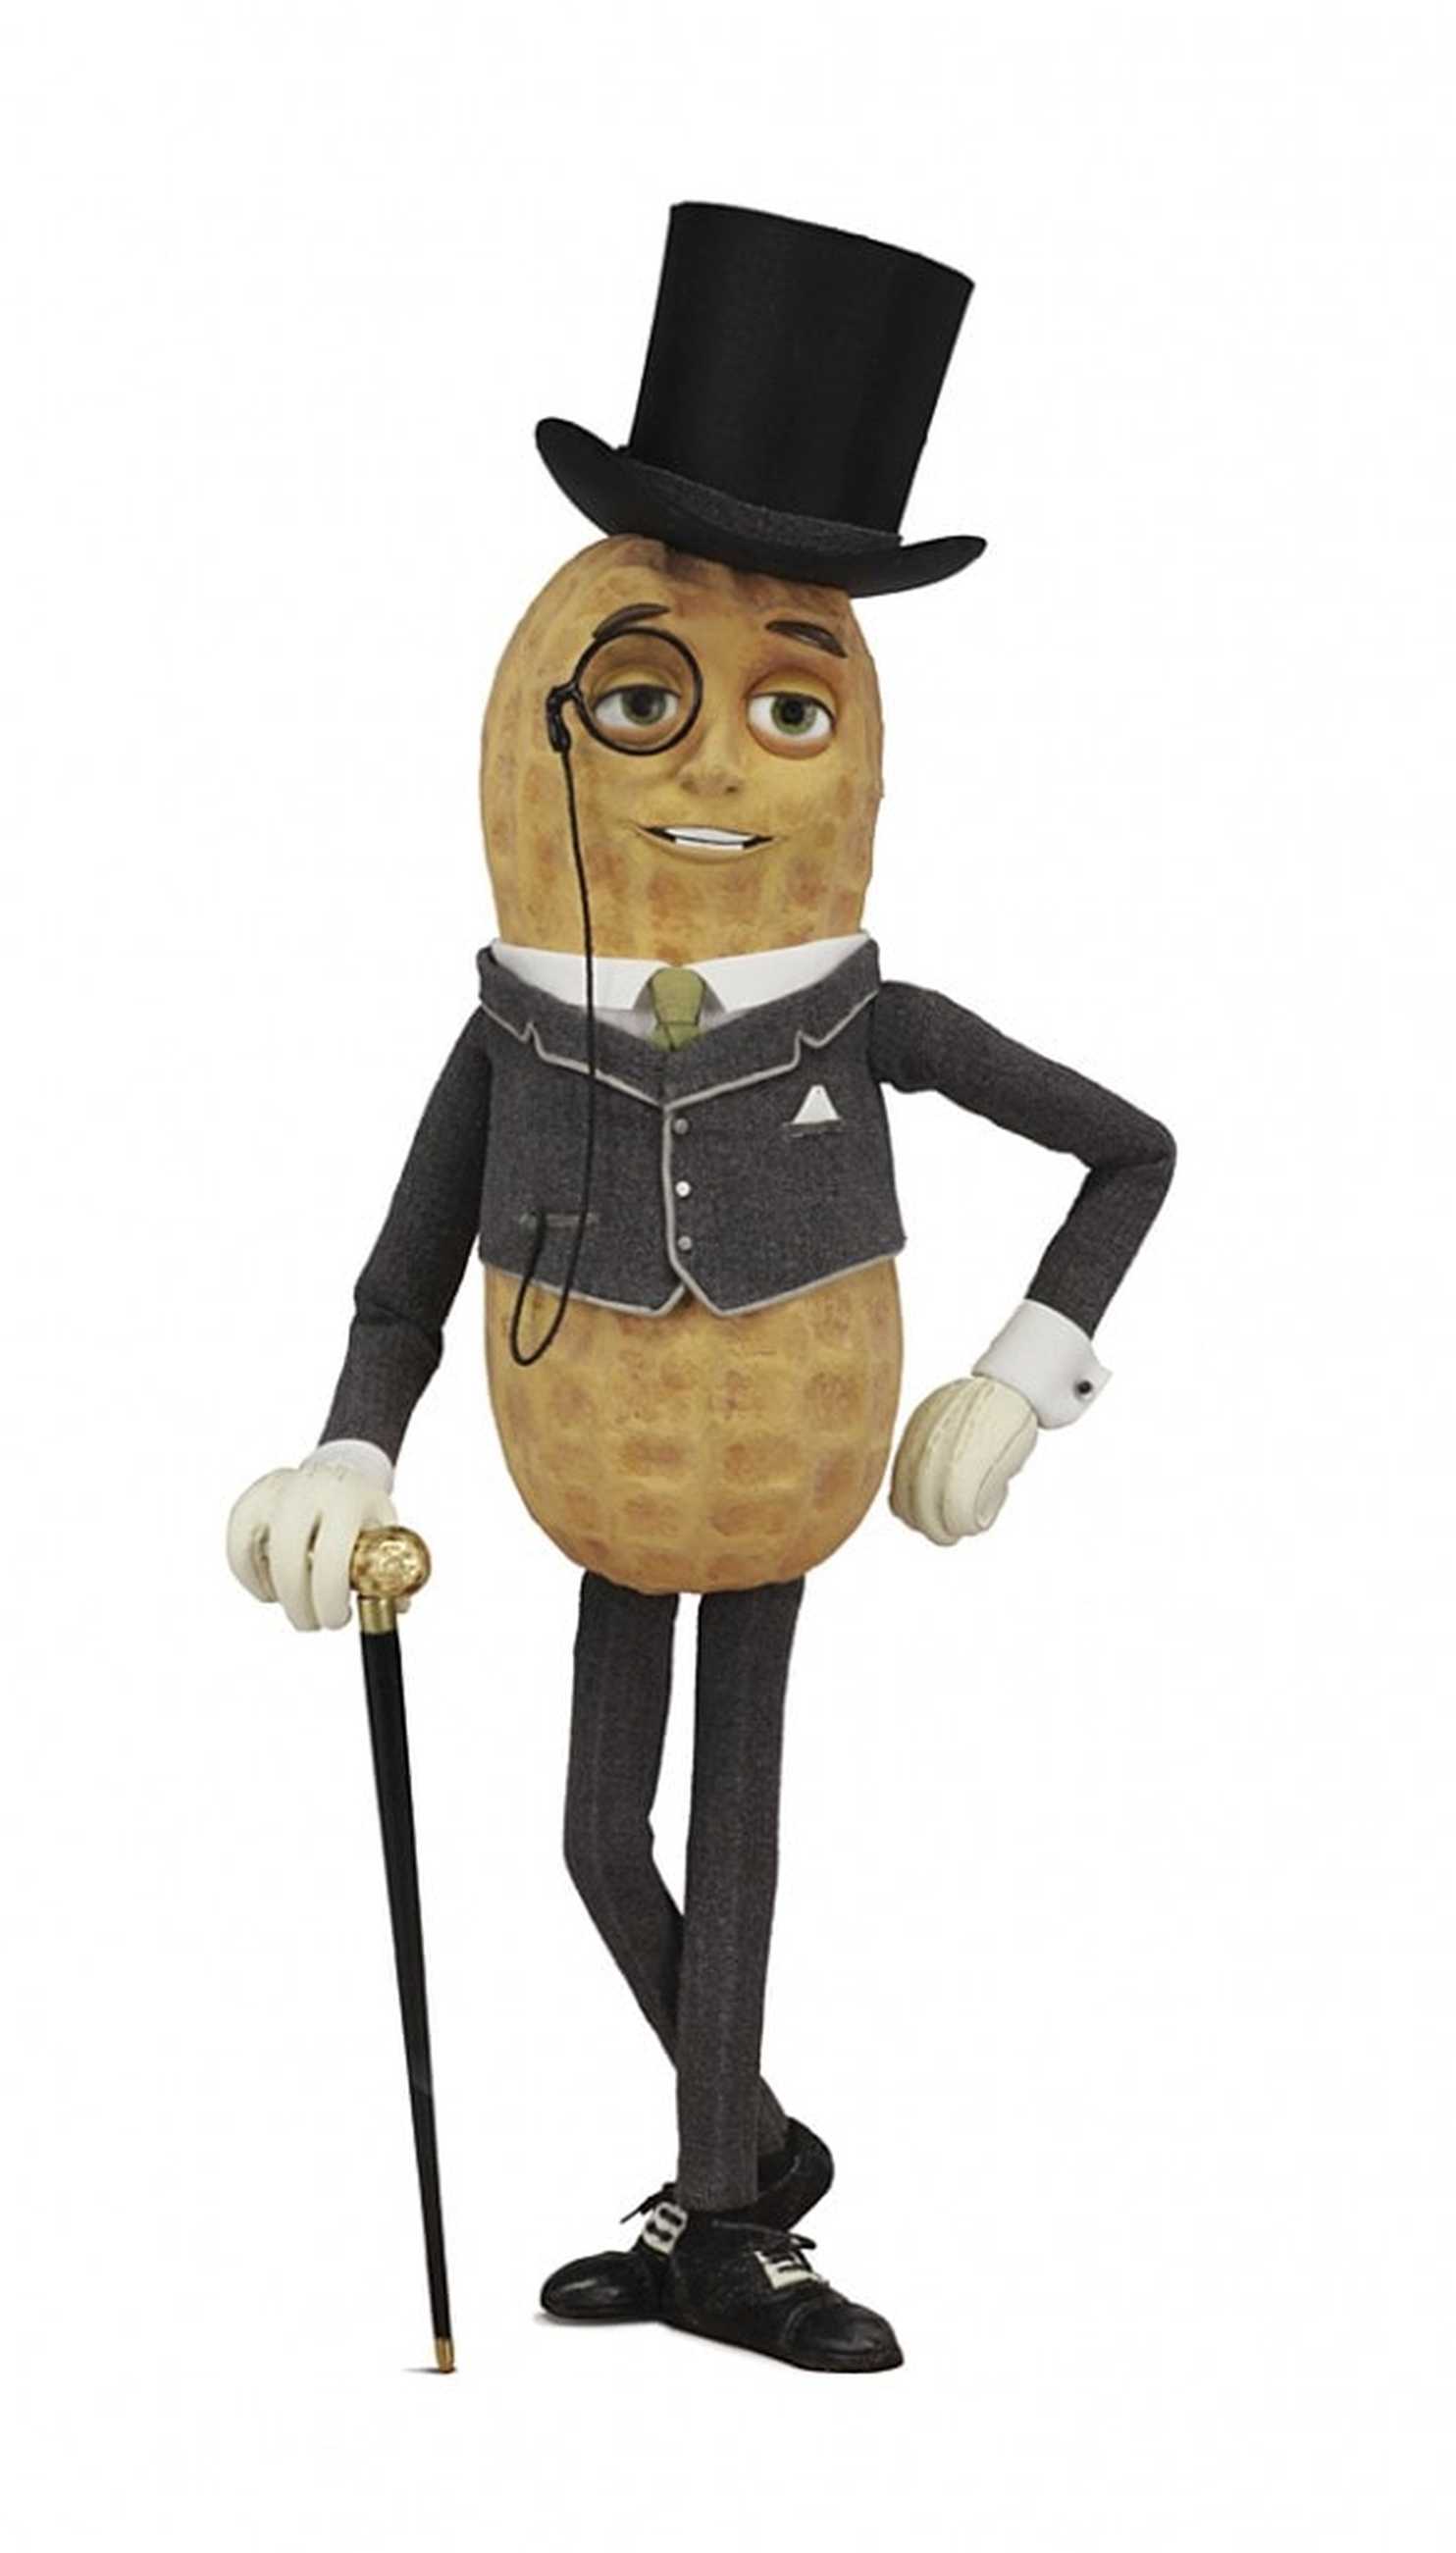 Mr. Peanut weighs in on the monocle trend story - The Washington Post1484 x 2602